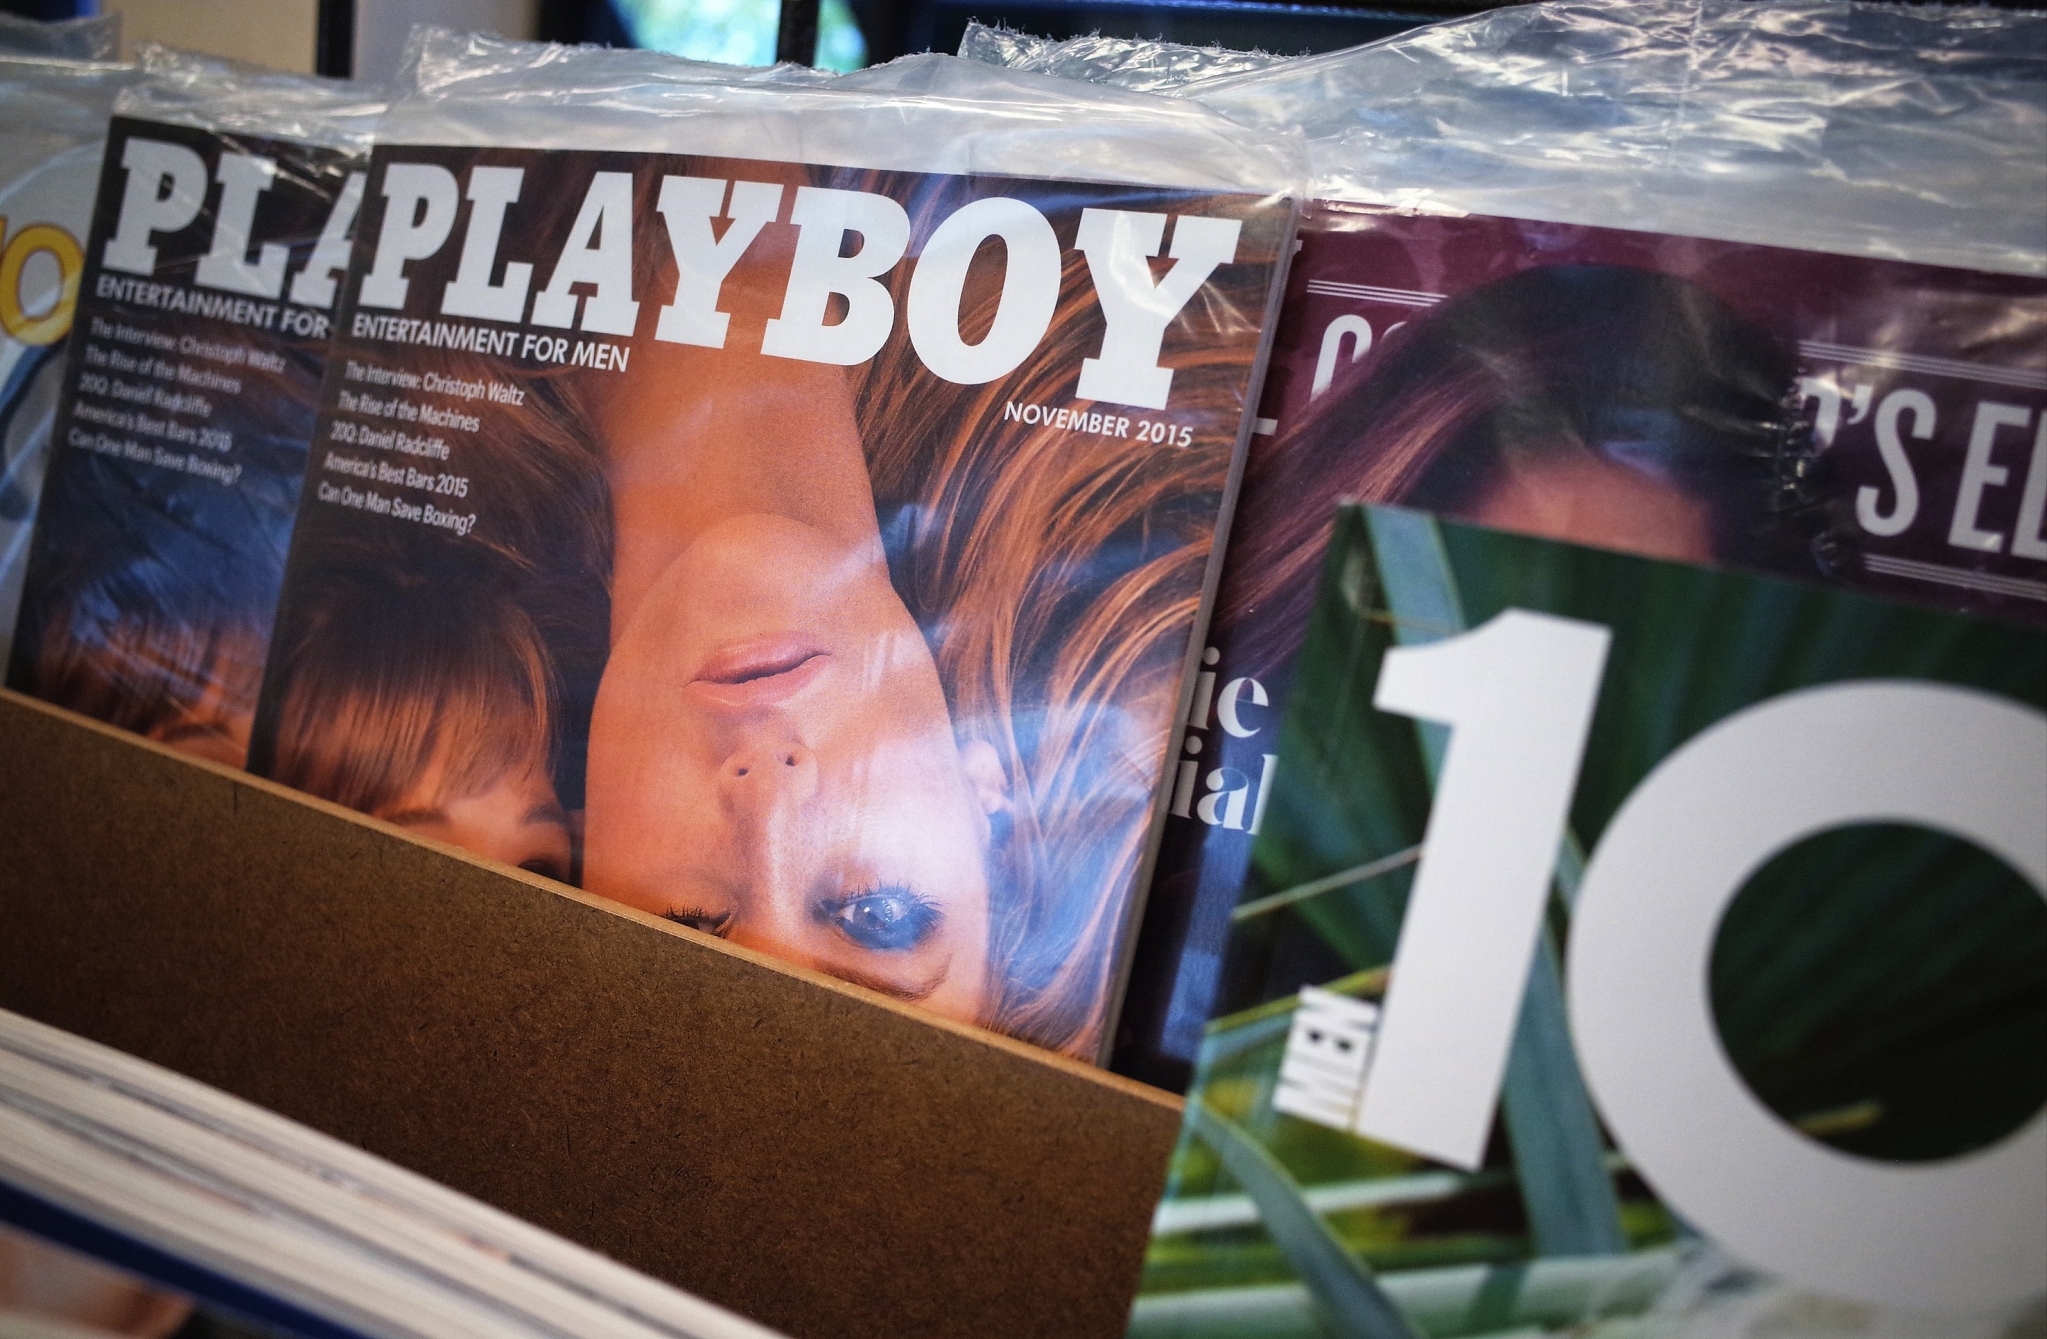 November 2015 issues of Playboy magazine are seen on the shelf of a bookstore in Bethesda, Maryland on October 13, 2015. Playboy said Tuesday it will stop publishing nude photos in its iconic magazine for men, throwing in the towel in the face of rampant online pornography. AFP PHOTO/MANDEL NGAN        (Photo credit should read MANDEL NGAN/AFP/Getty Images)